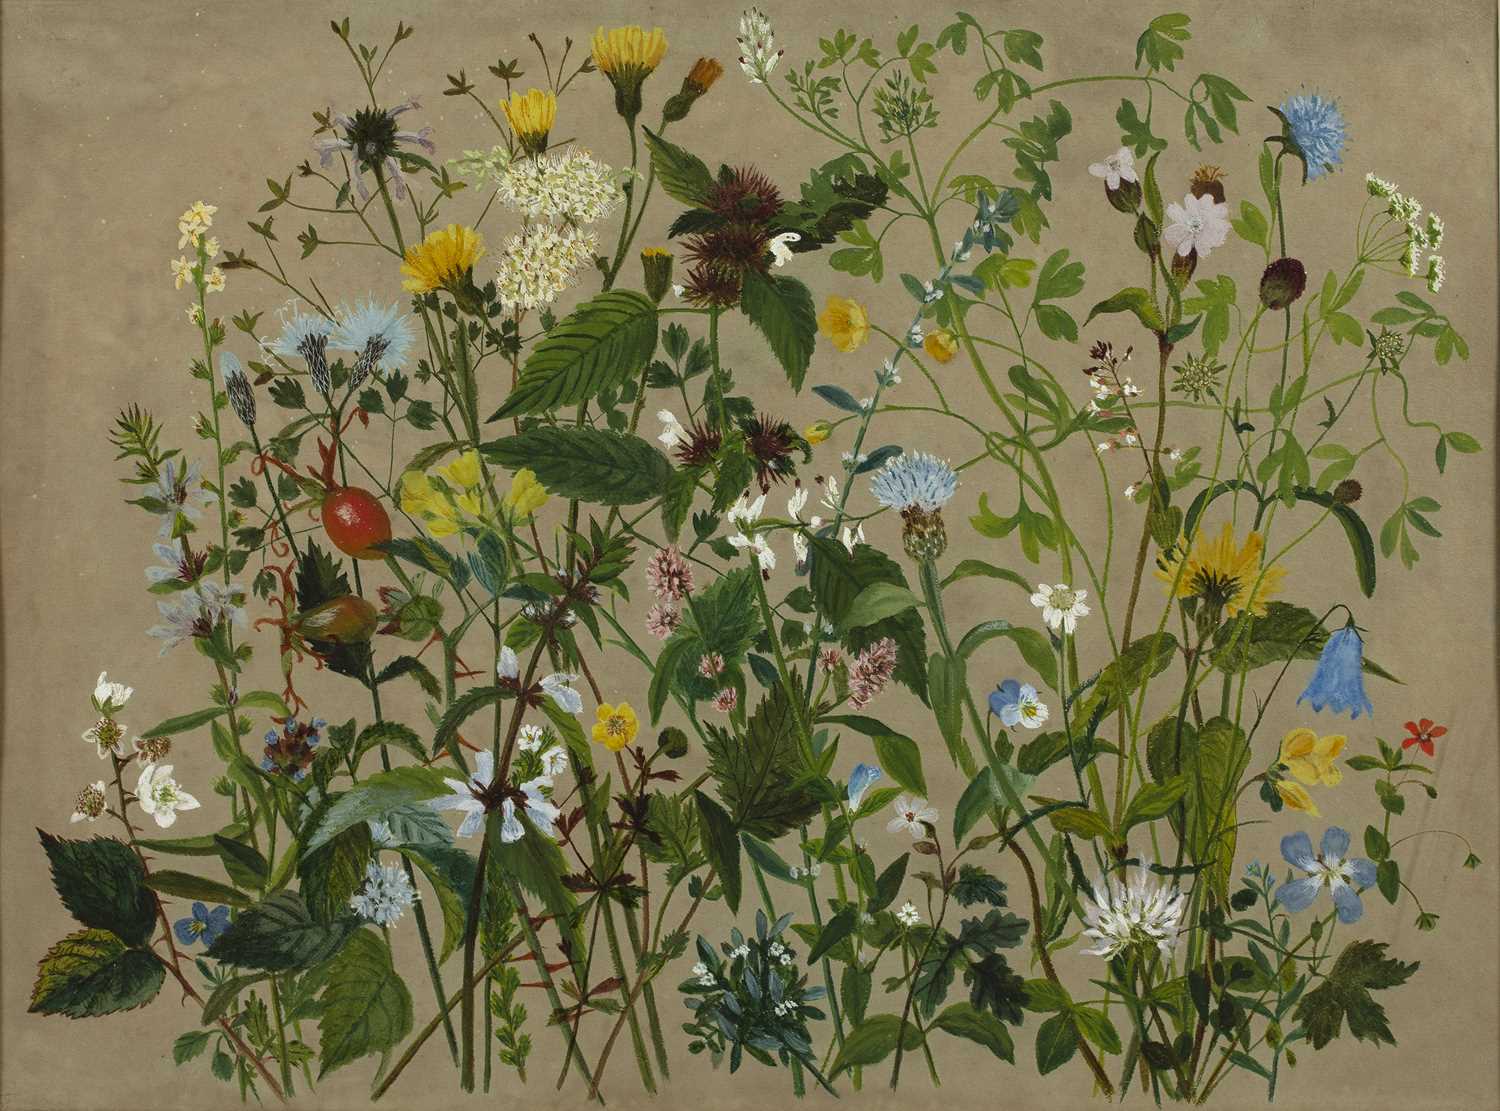 19th century English school 'Forty Wild Flowers Picked on the Shore at Lowood, 1887', apparently